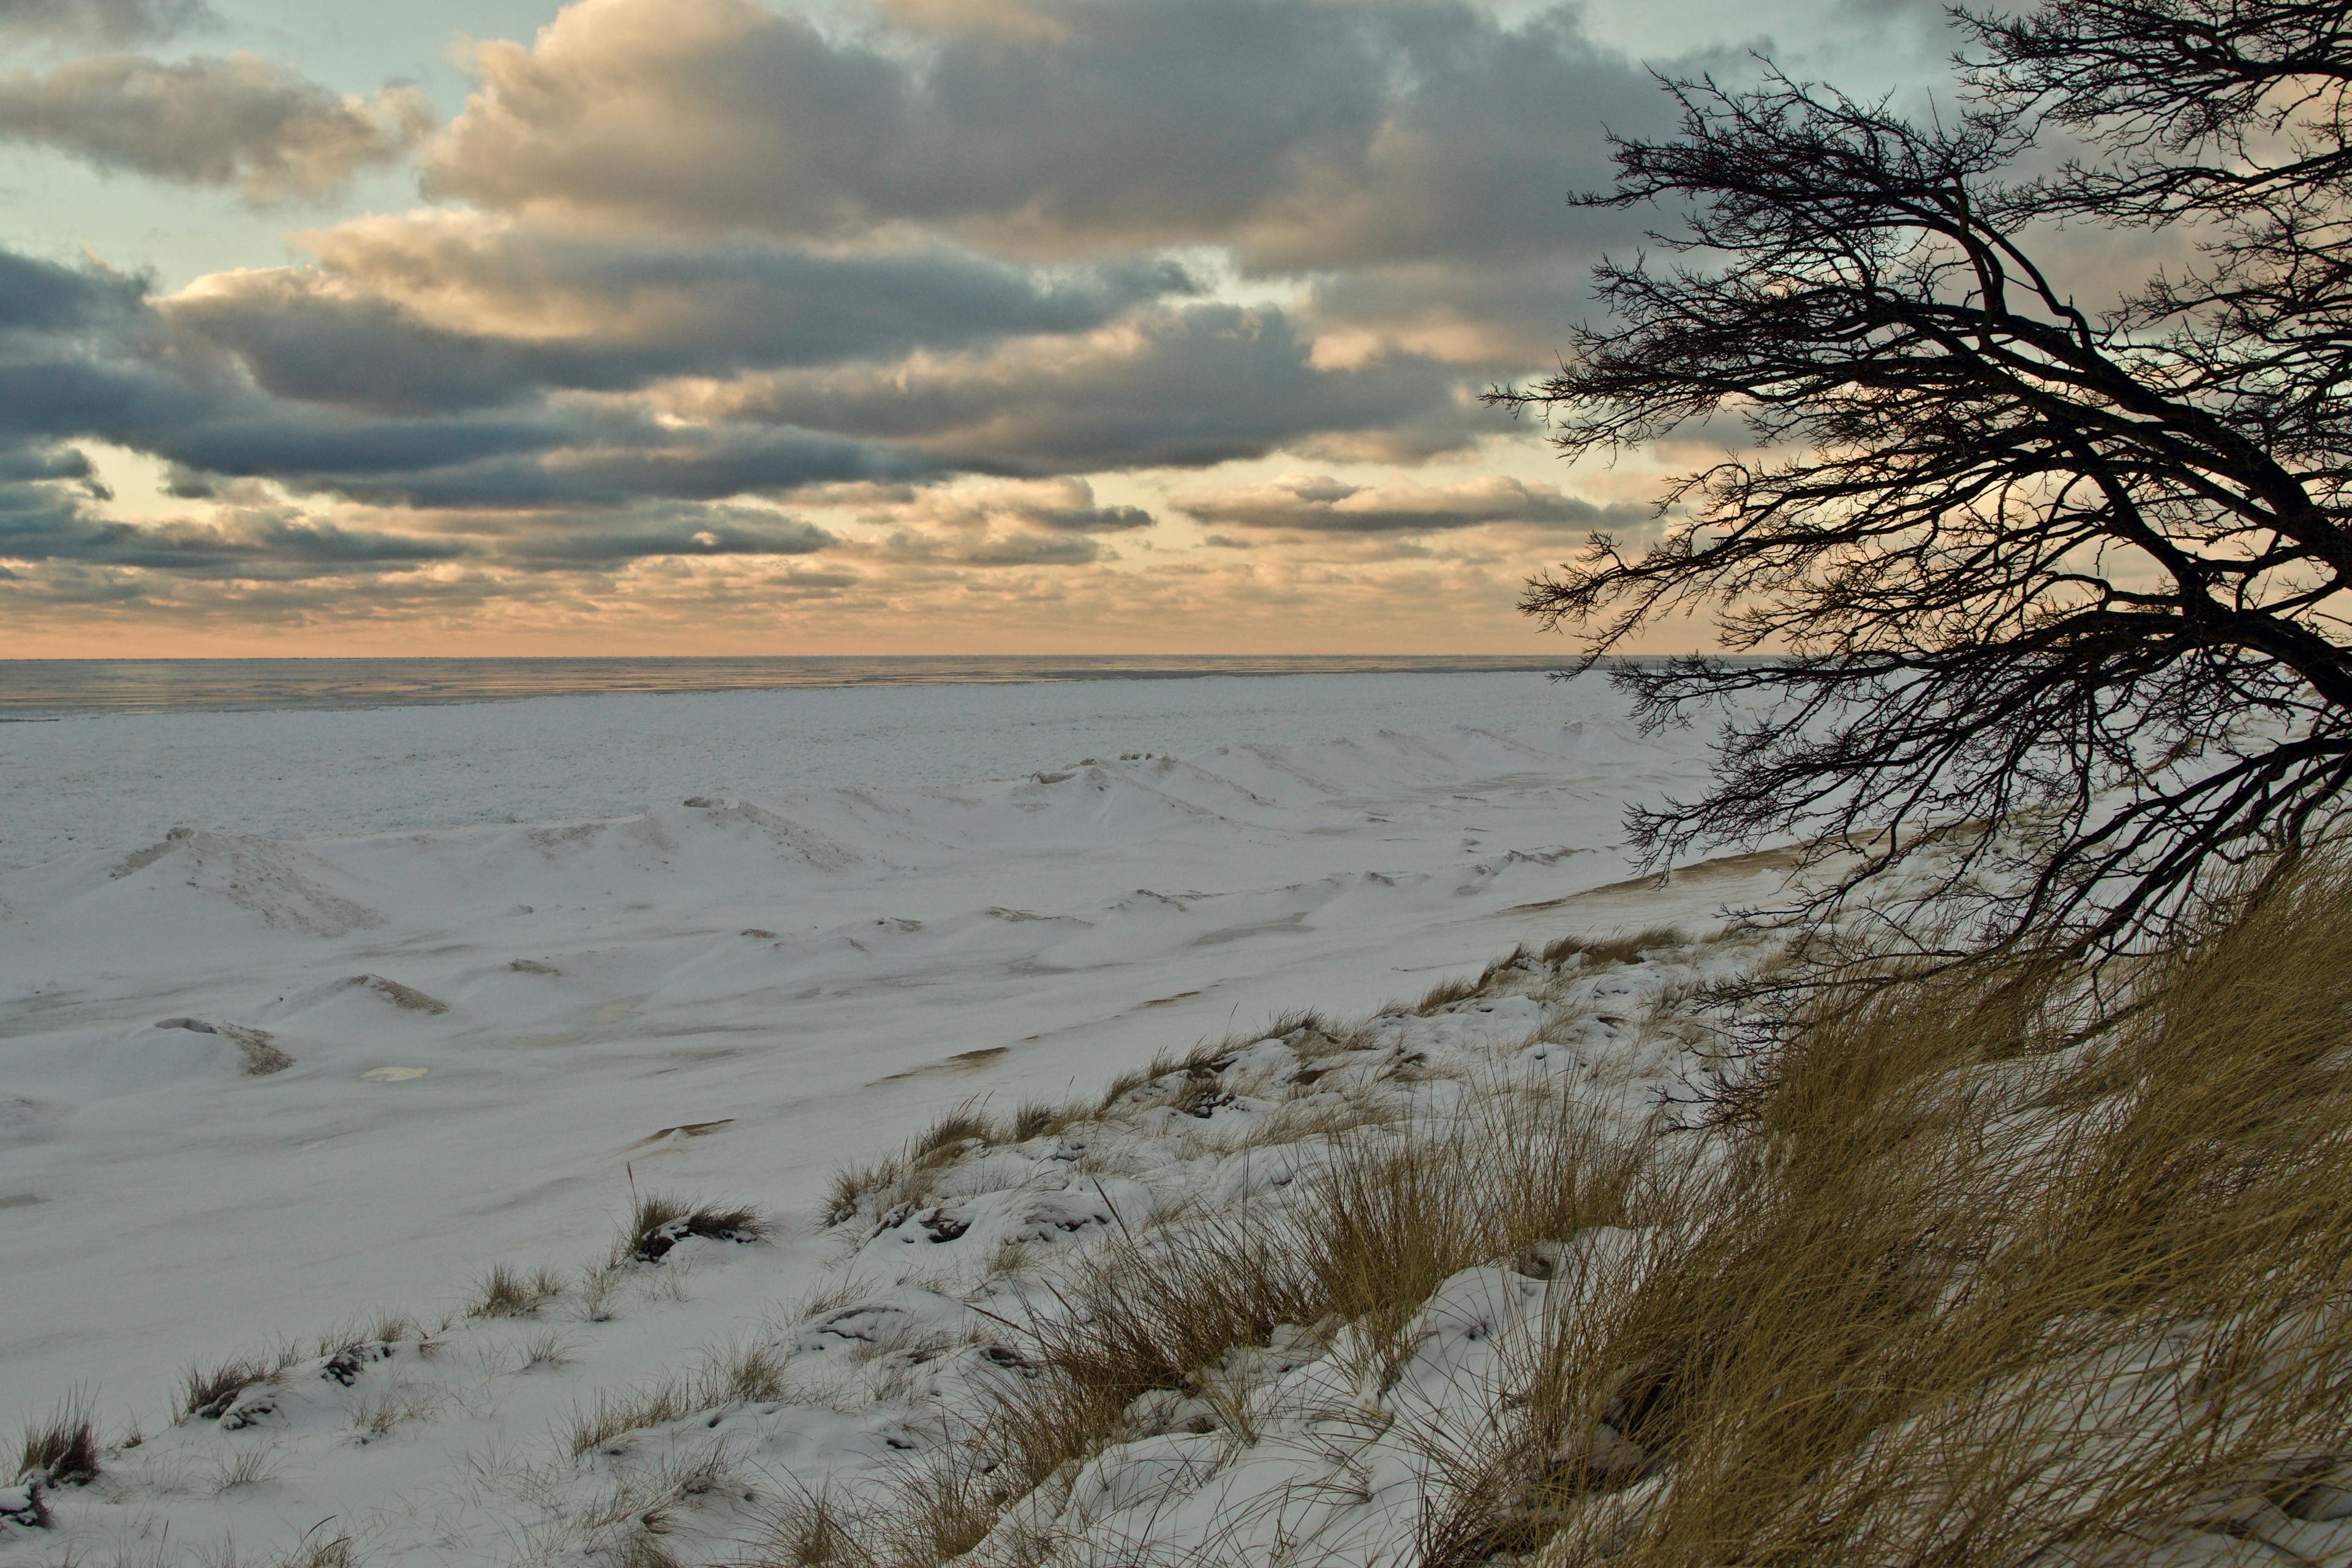 Sunset over lake Michigan in the winter